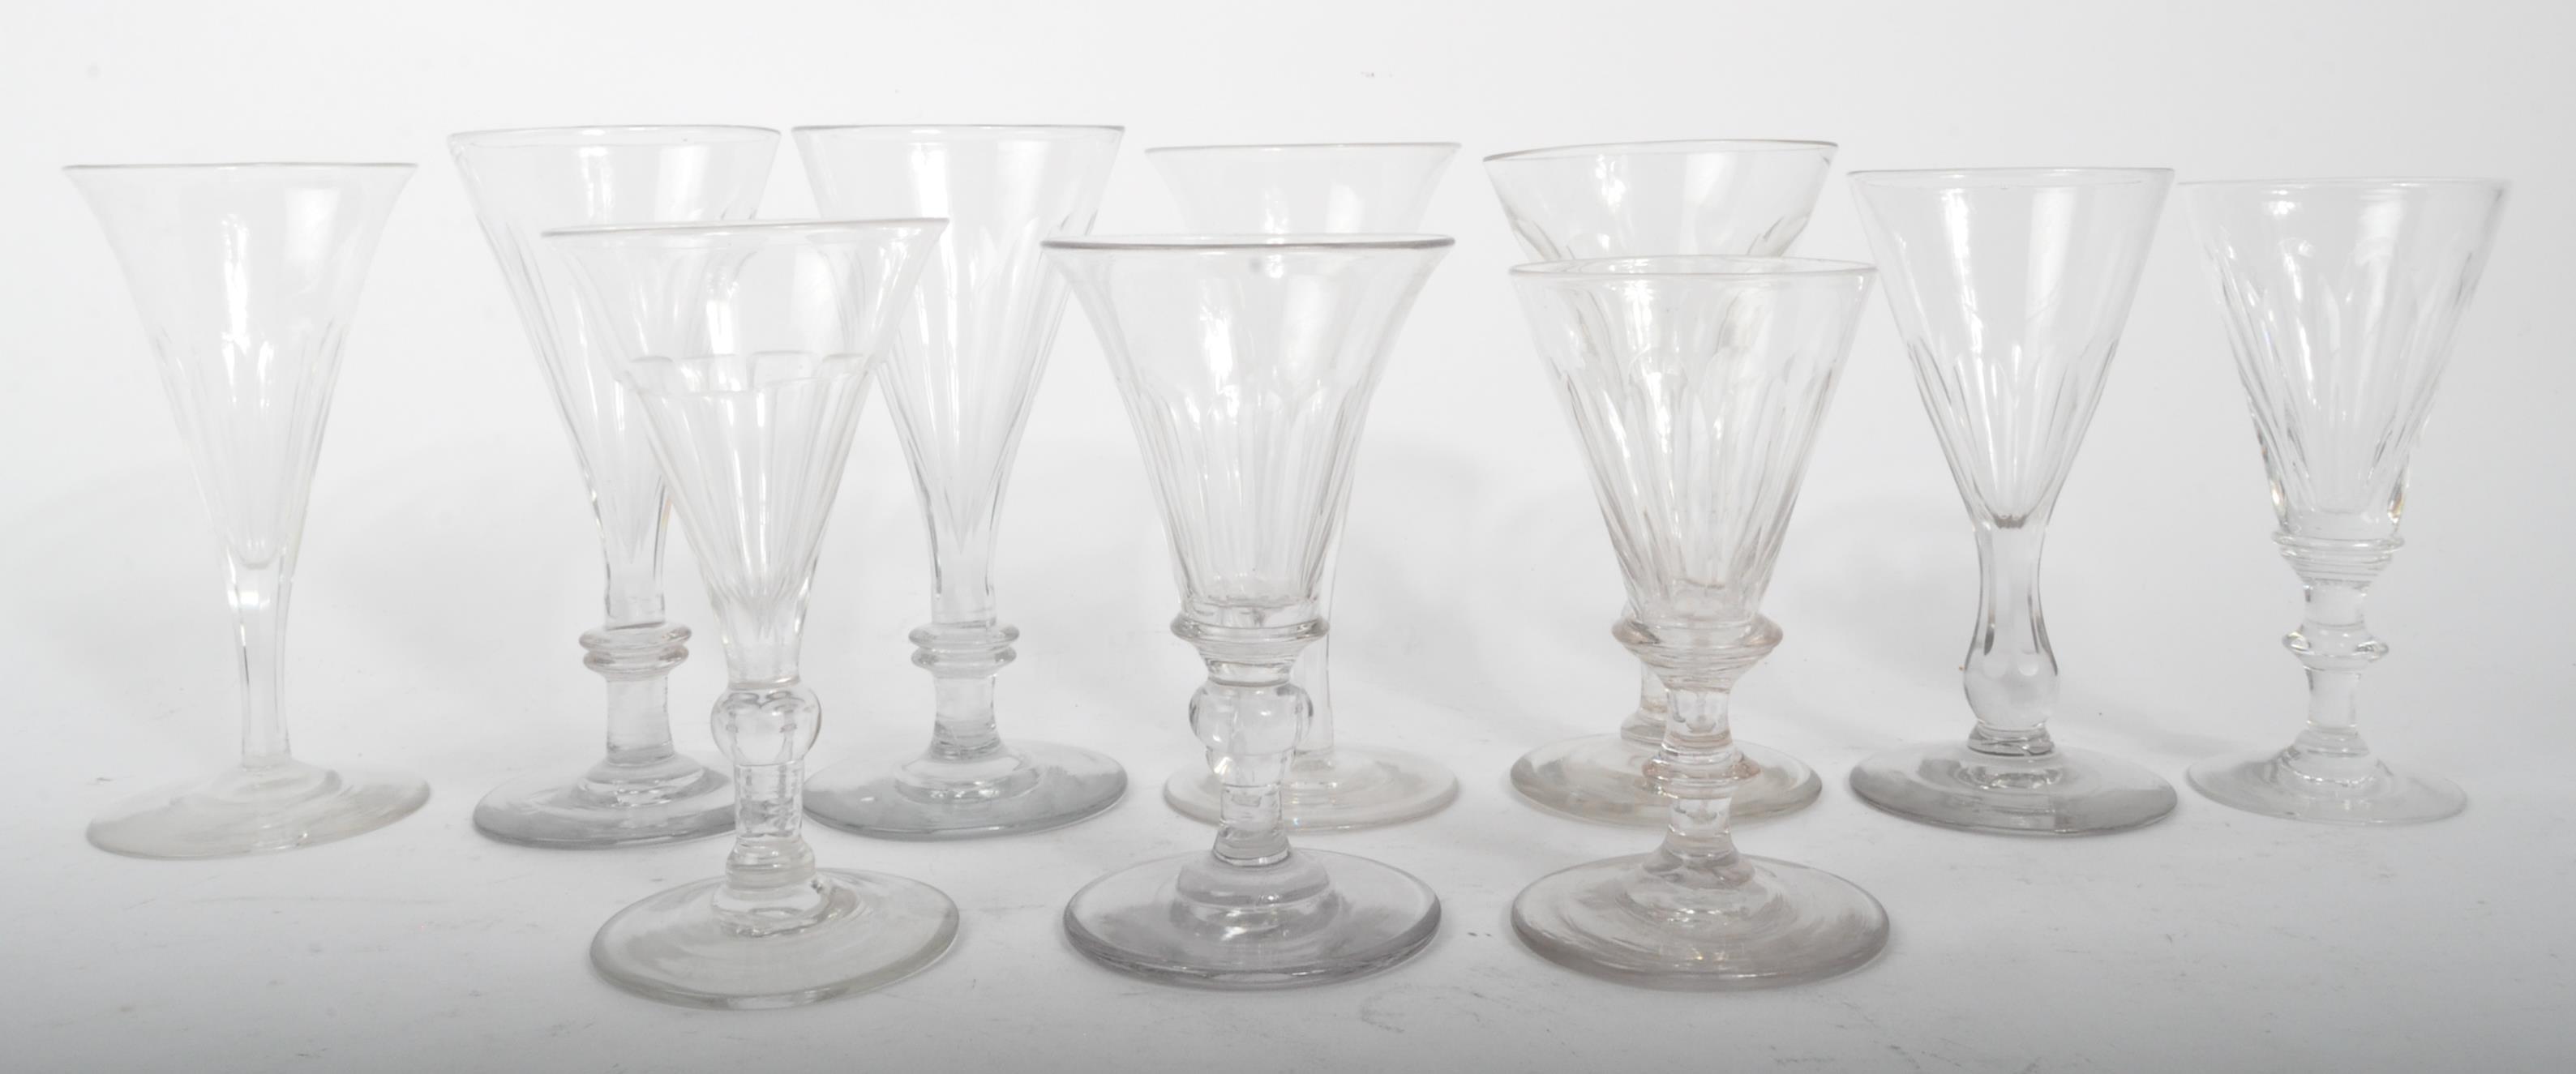 ASSORTMENT OF 18TH & 19TH CENTURY DRINKING GLASSES